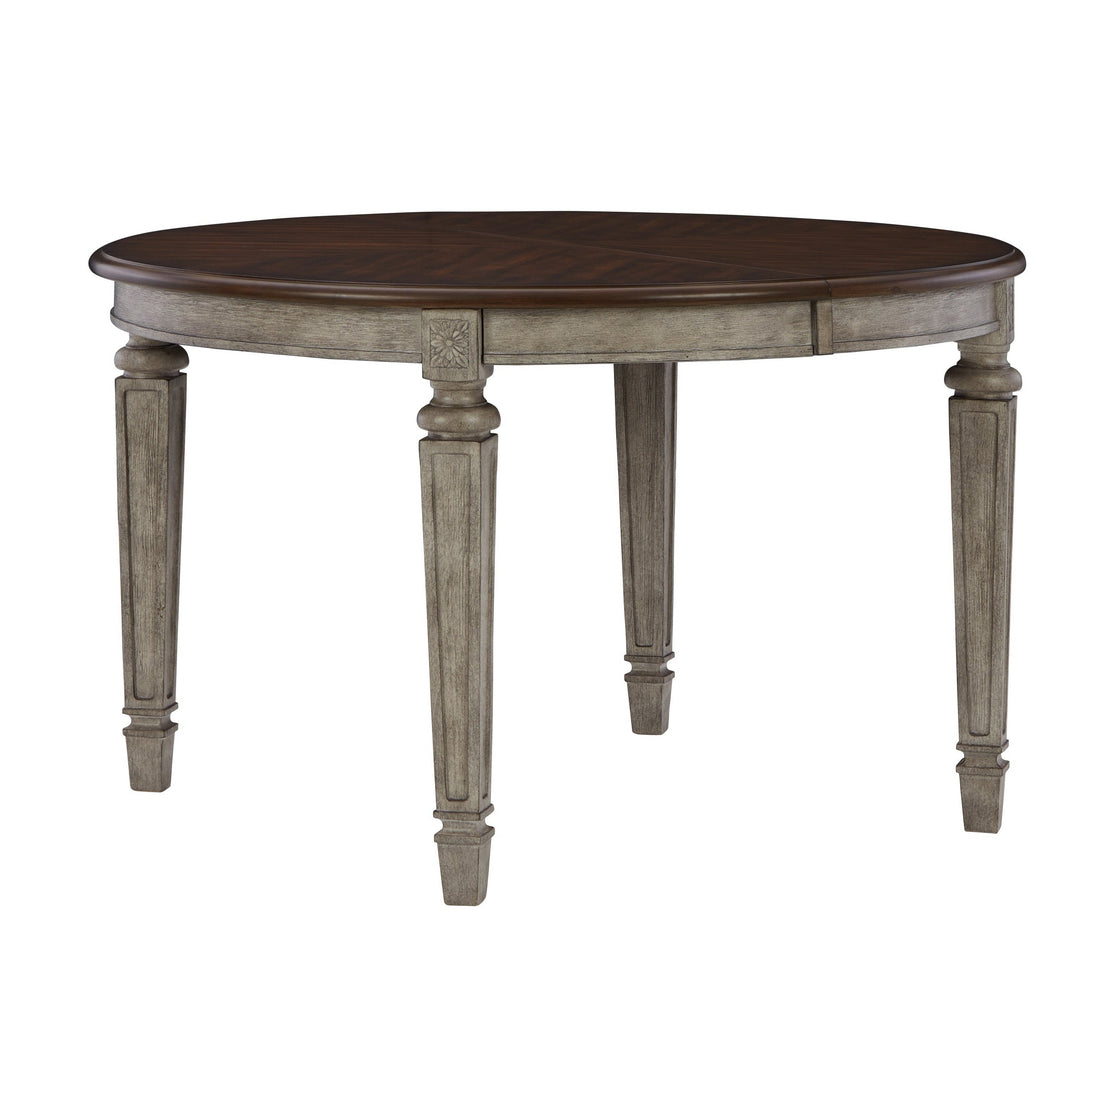 Lodenbay Dining Table Ash-D751-35